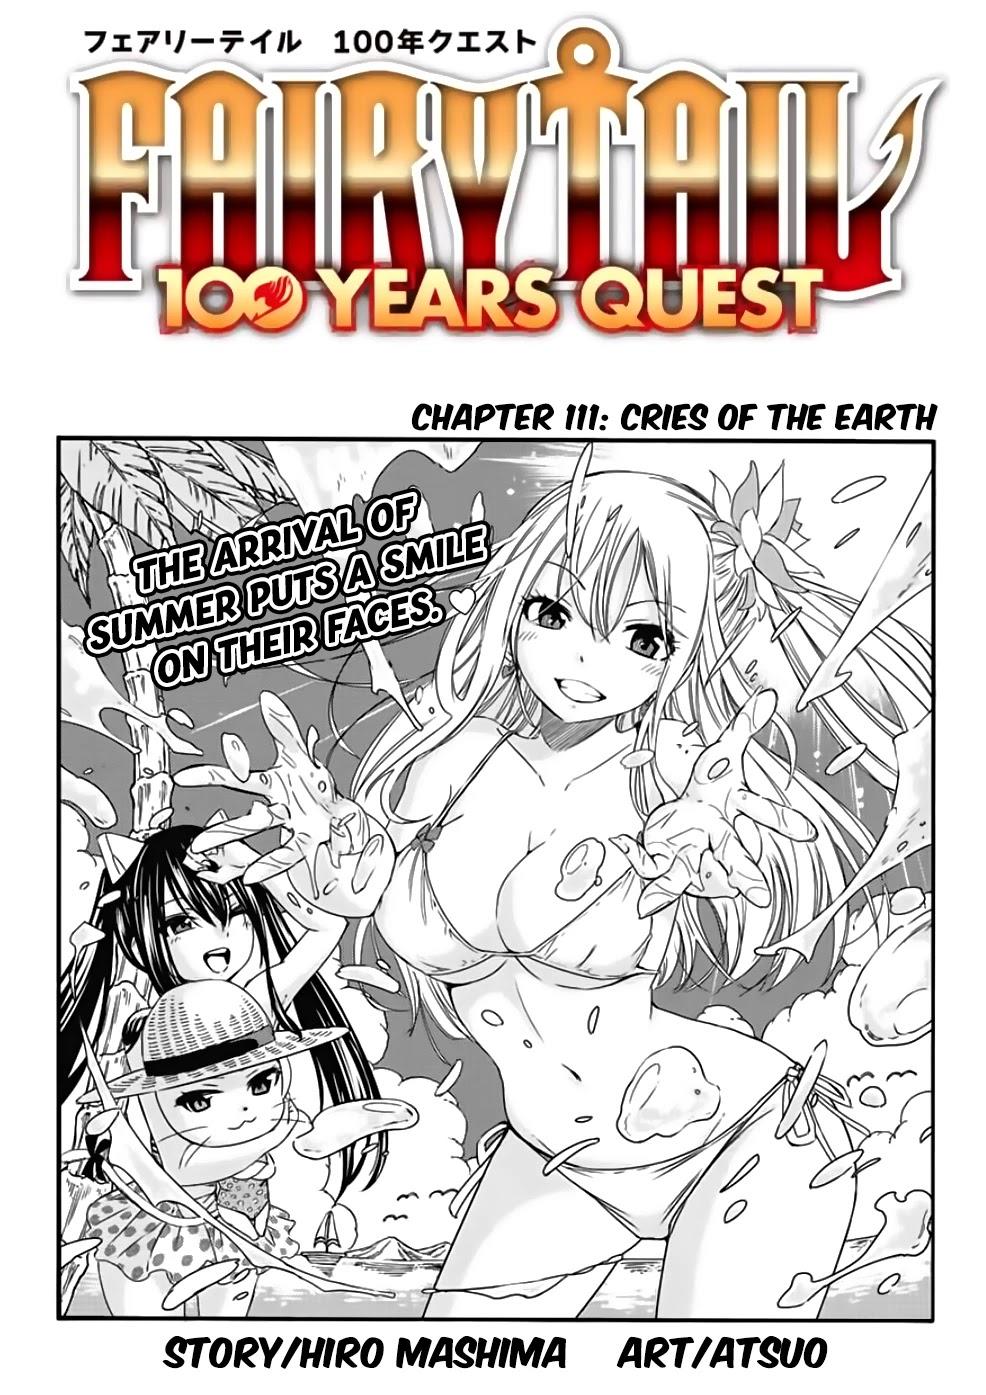 Fairy Tail 100 Years Quest Reveals Character Popularity Contest Winners